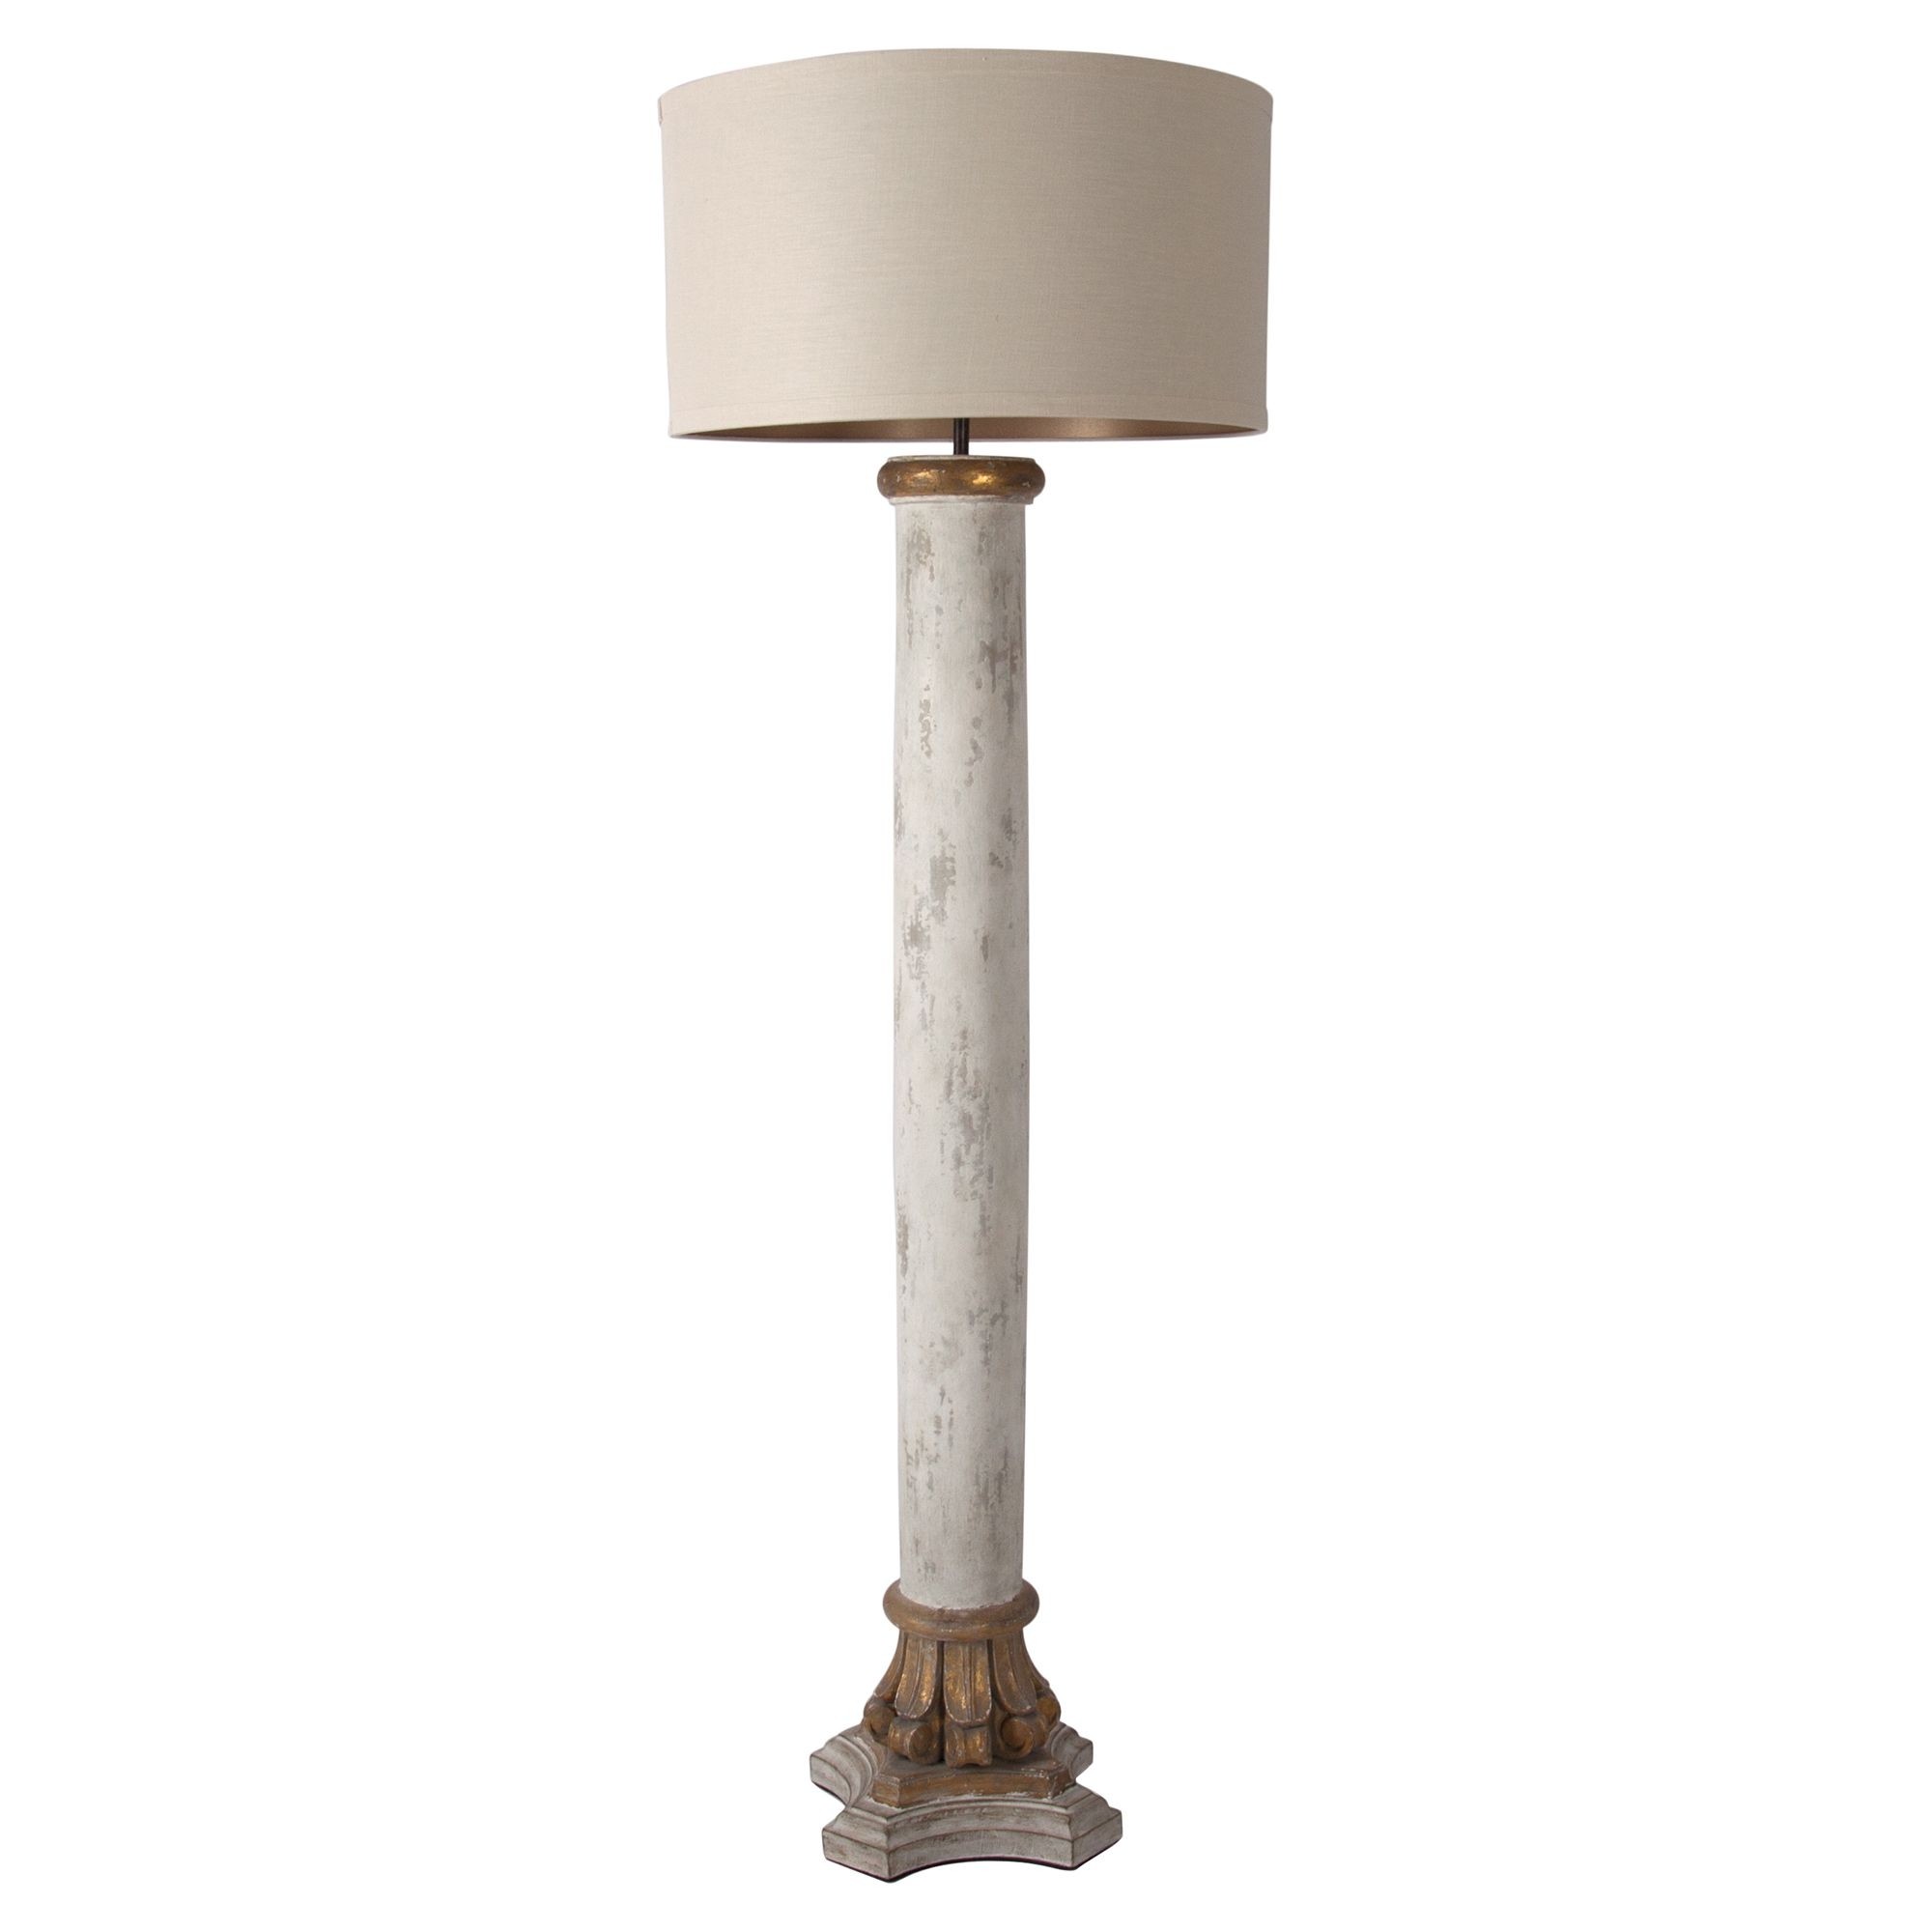 Cyrille french country antique white column floor lamp 1